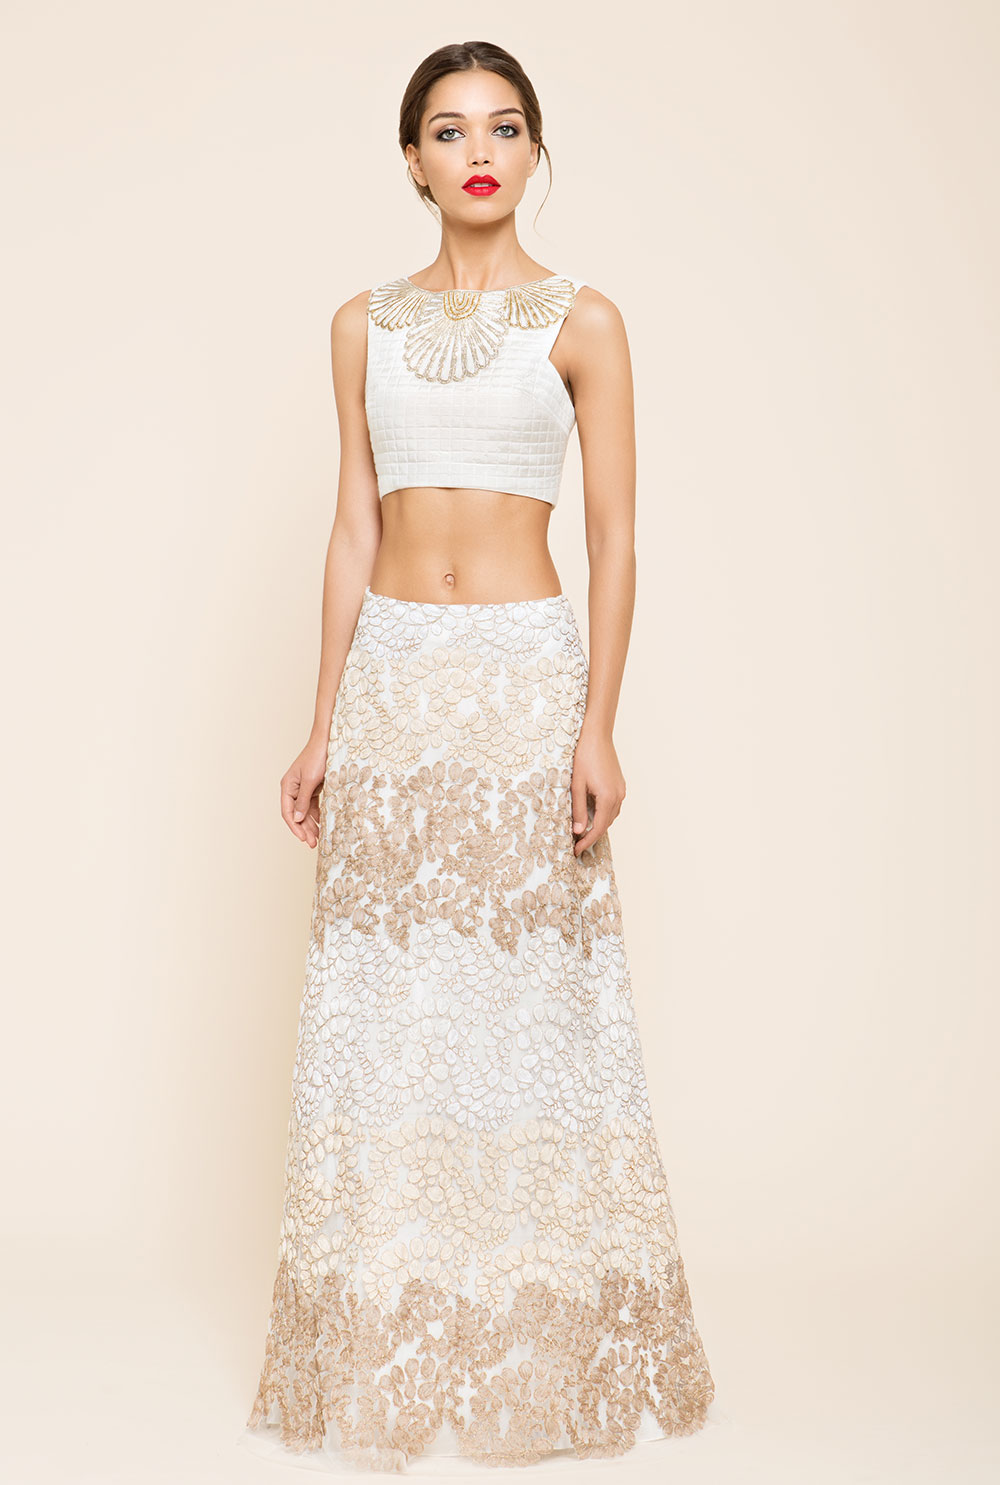 Modern two-piece wedding outfit for contemporary brides